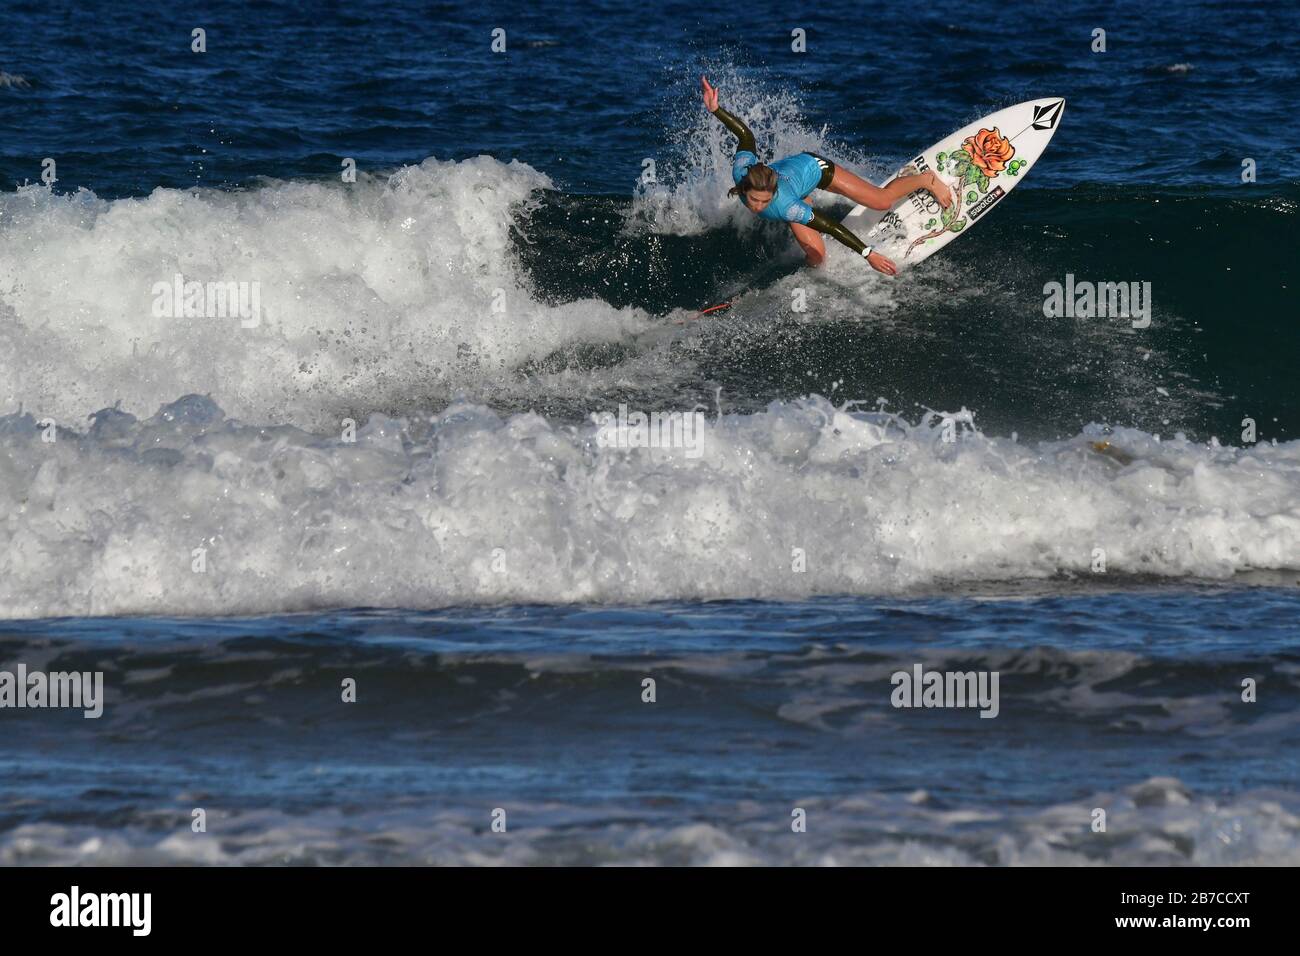 Coco Ho in action at the Sydney Surf Pro 2020 Stock Photo